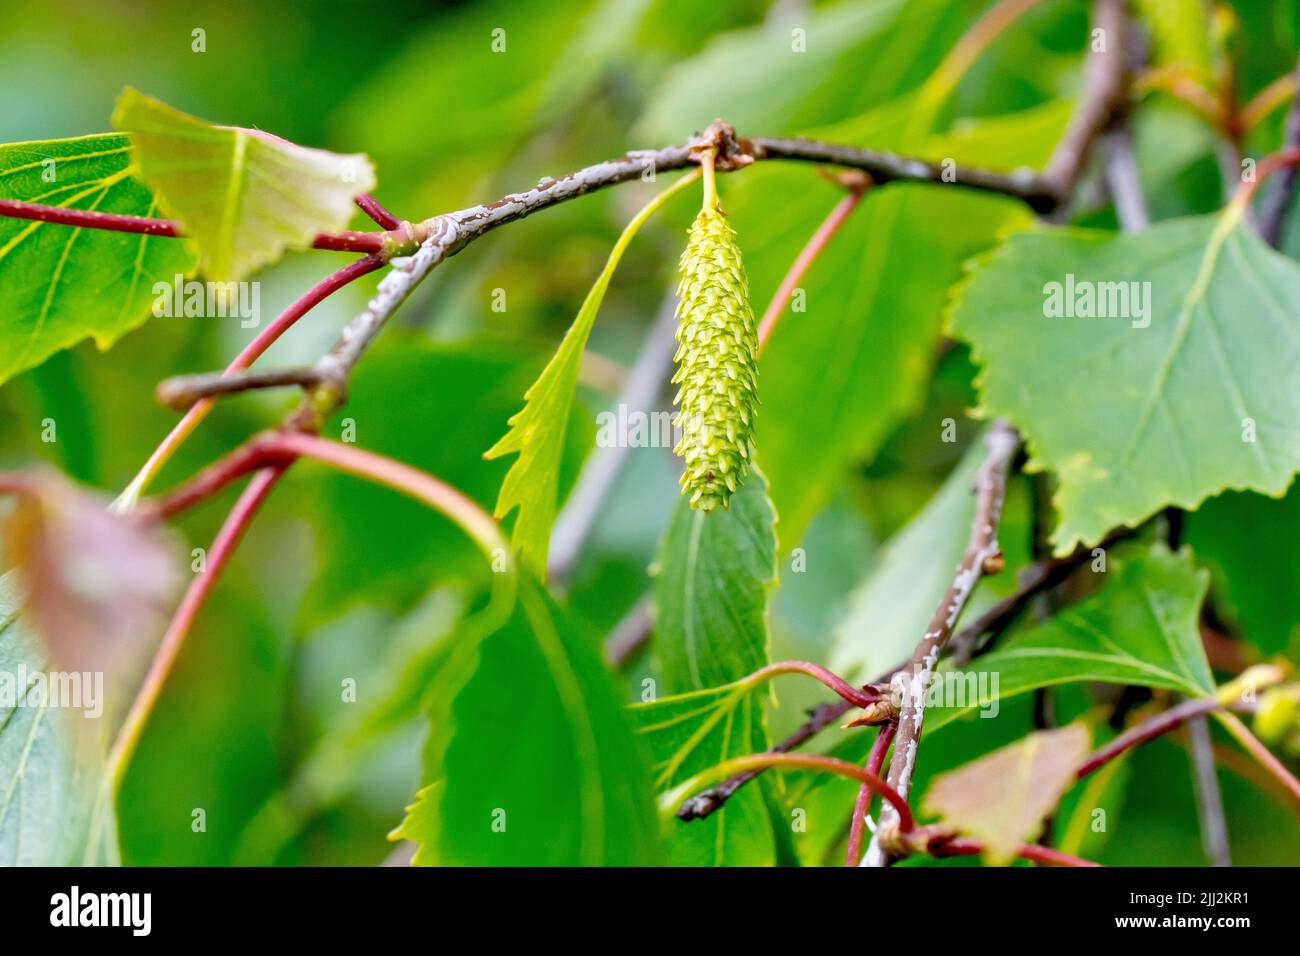 Silver Birch (betula pendula), close up of a solitary unripe fruit hanging from a branch amongst the leaves. Stock Photo